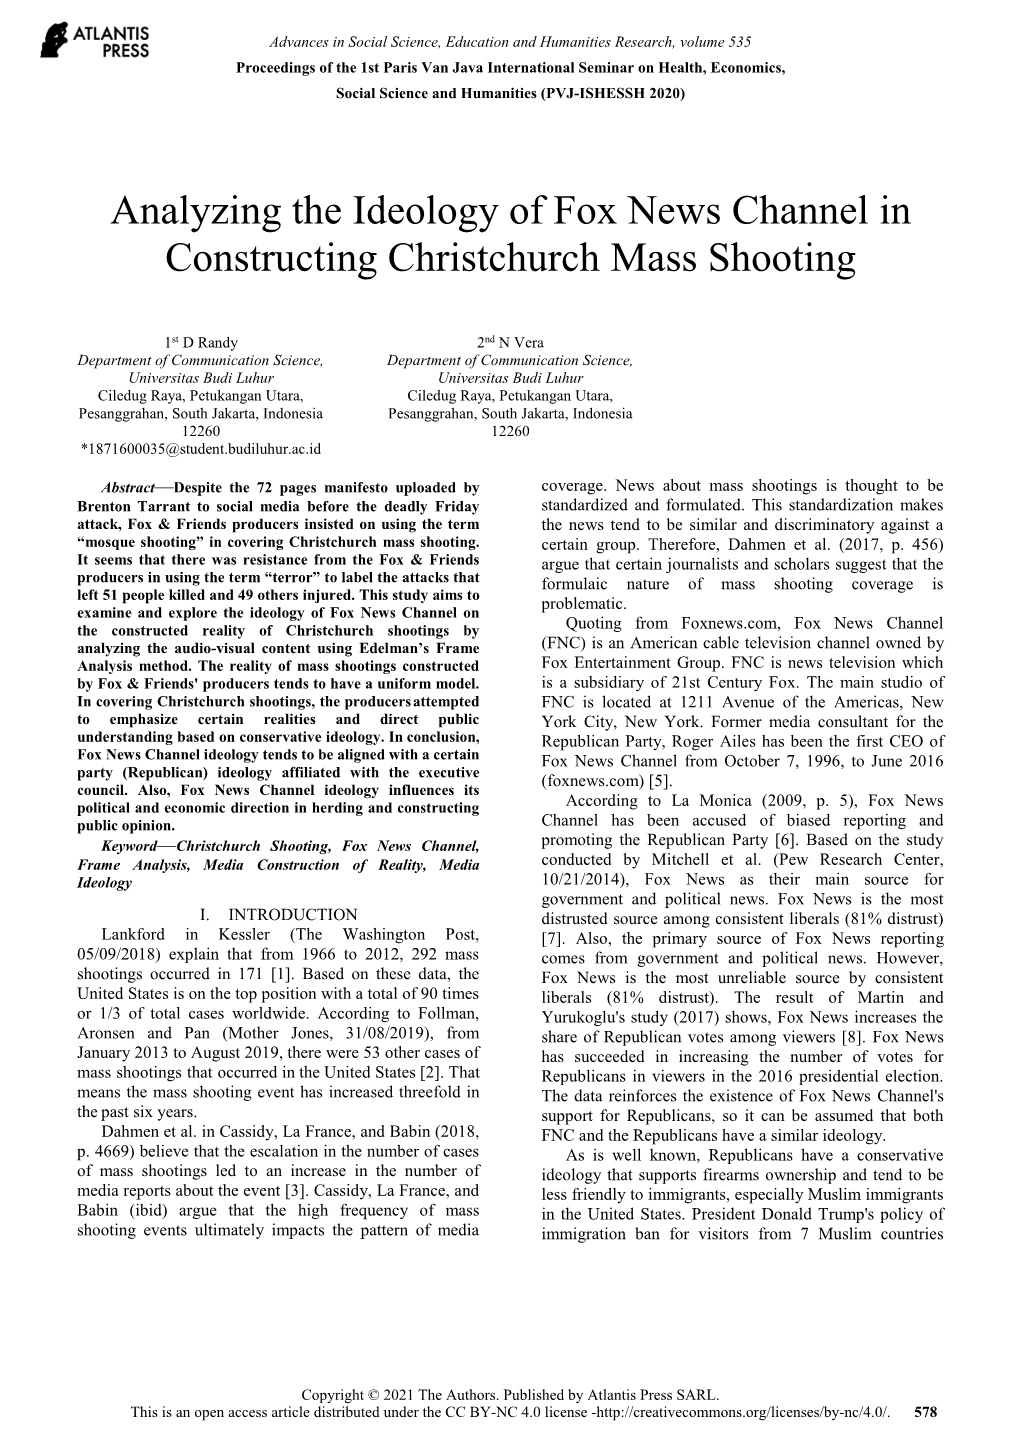 Analyzing the Ideology of Fox News Channel in Constructing Christchurch Mass Shooting